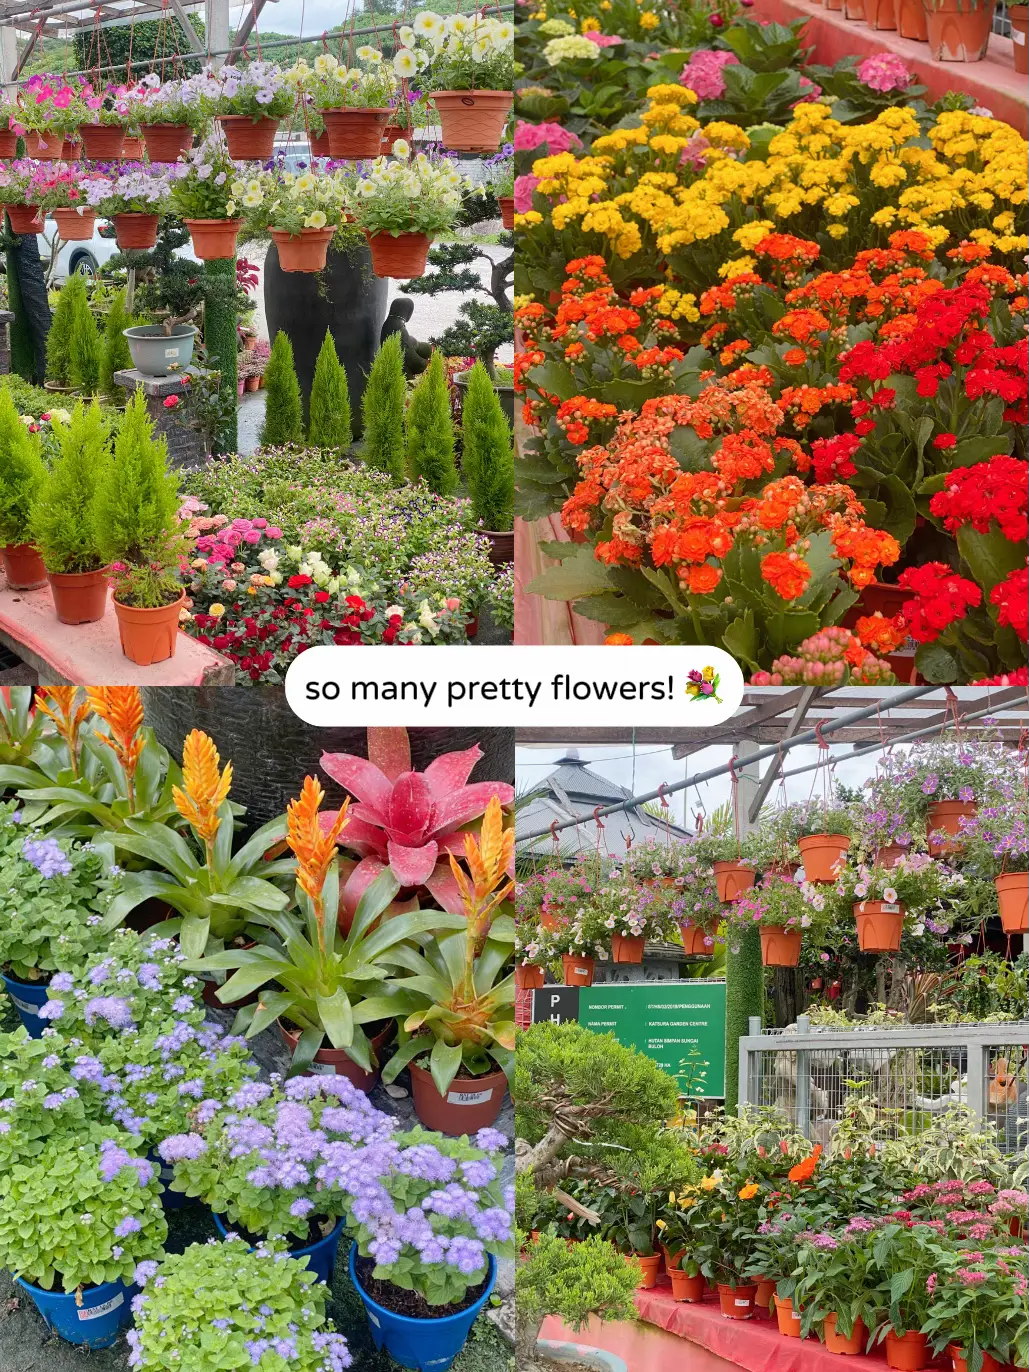 SAVE THIS for your next plant shopping trip! 🪴💐🌵🌼's images(2)